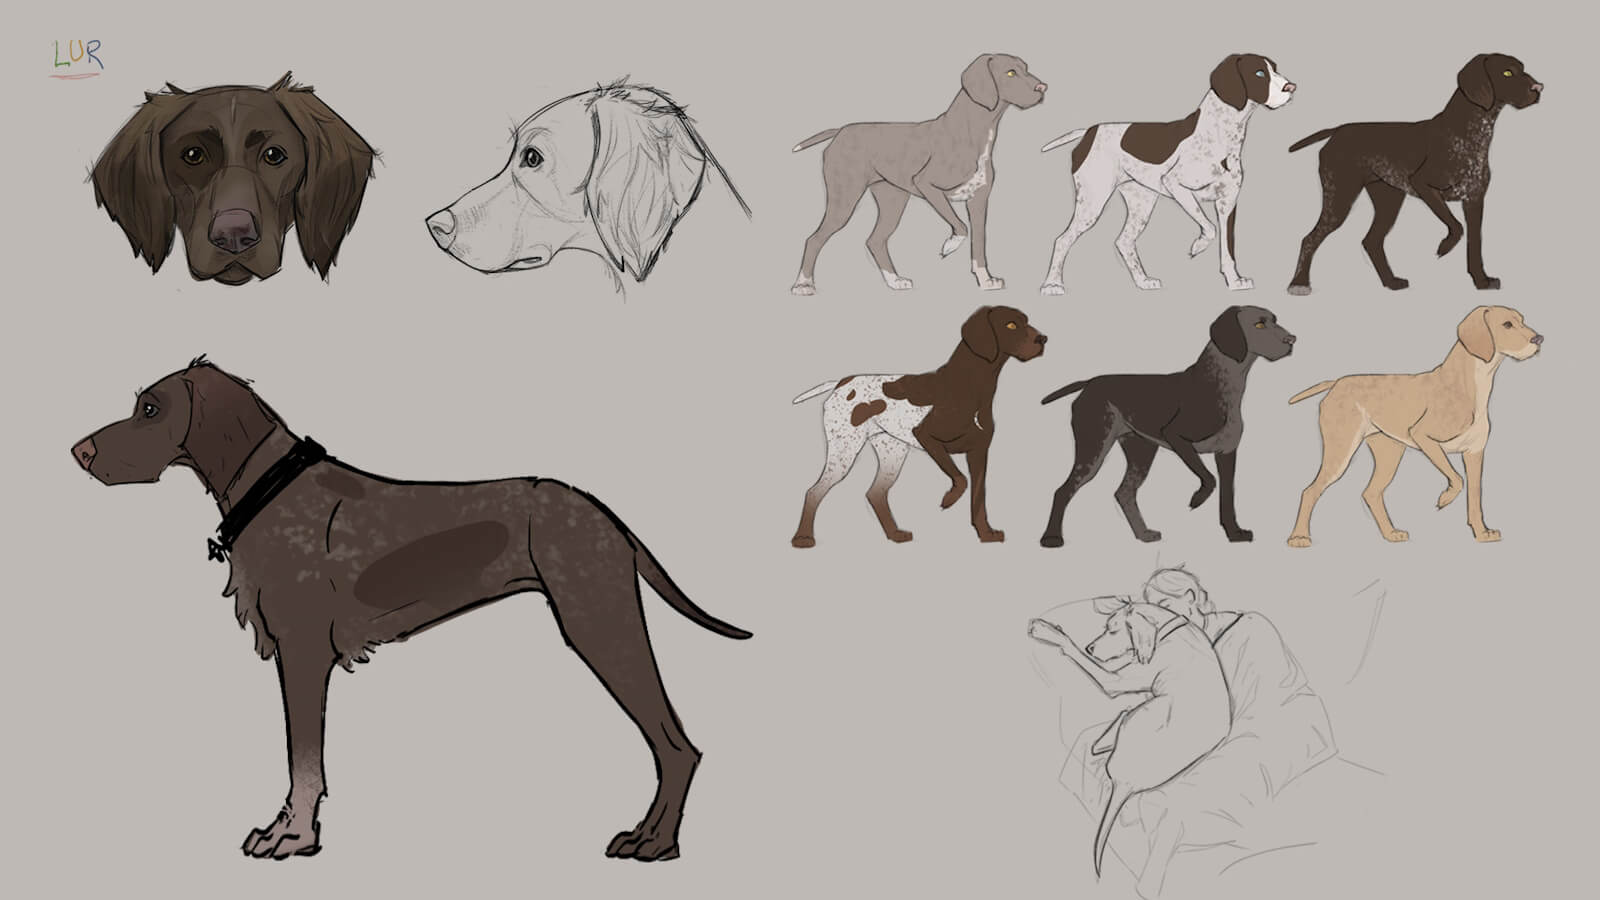 Early concept art showcasing Lur, the canine character in the film, during the initial stages of design.